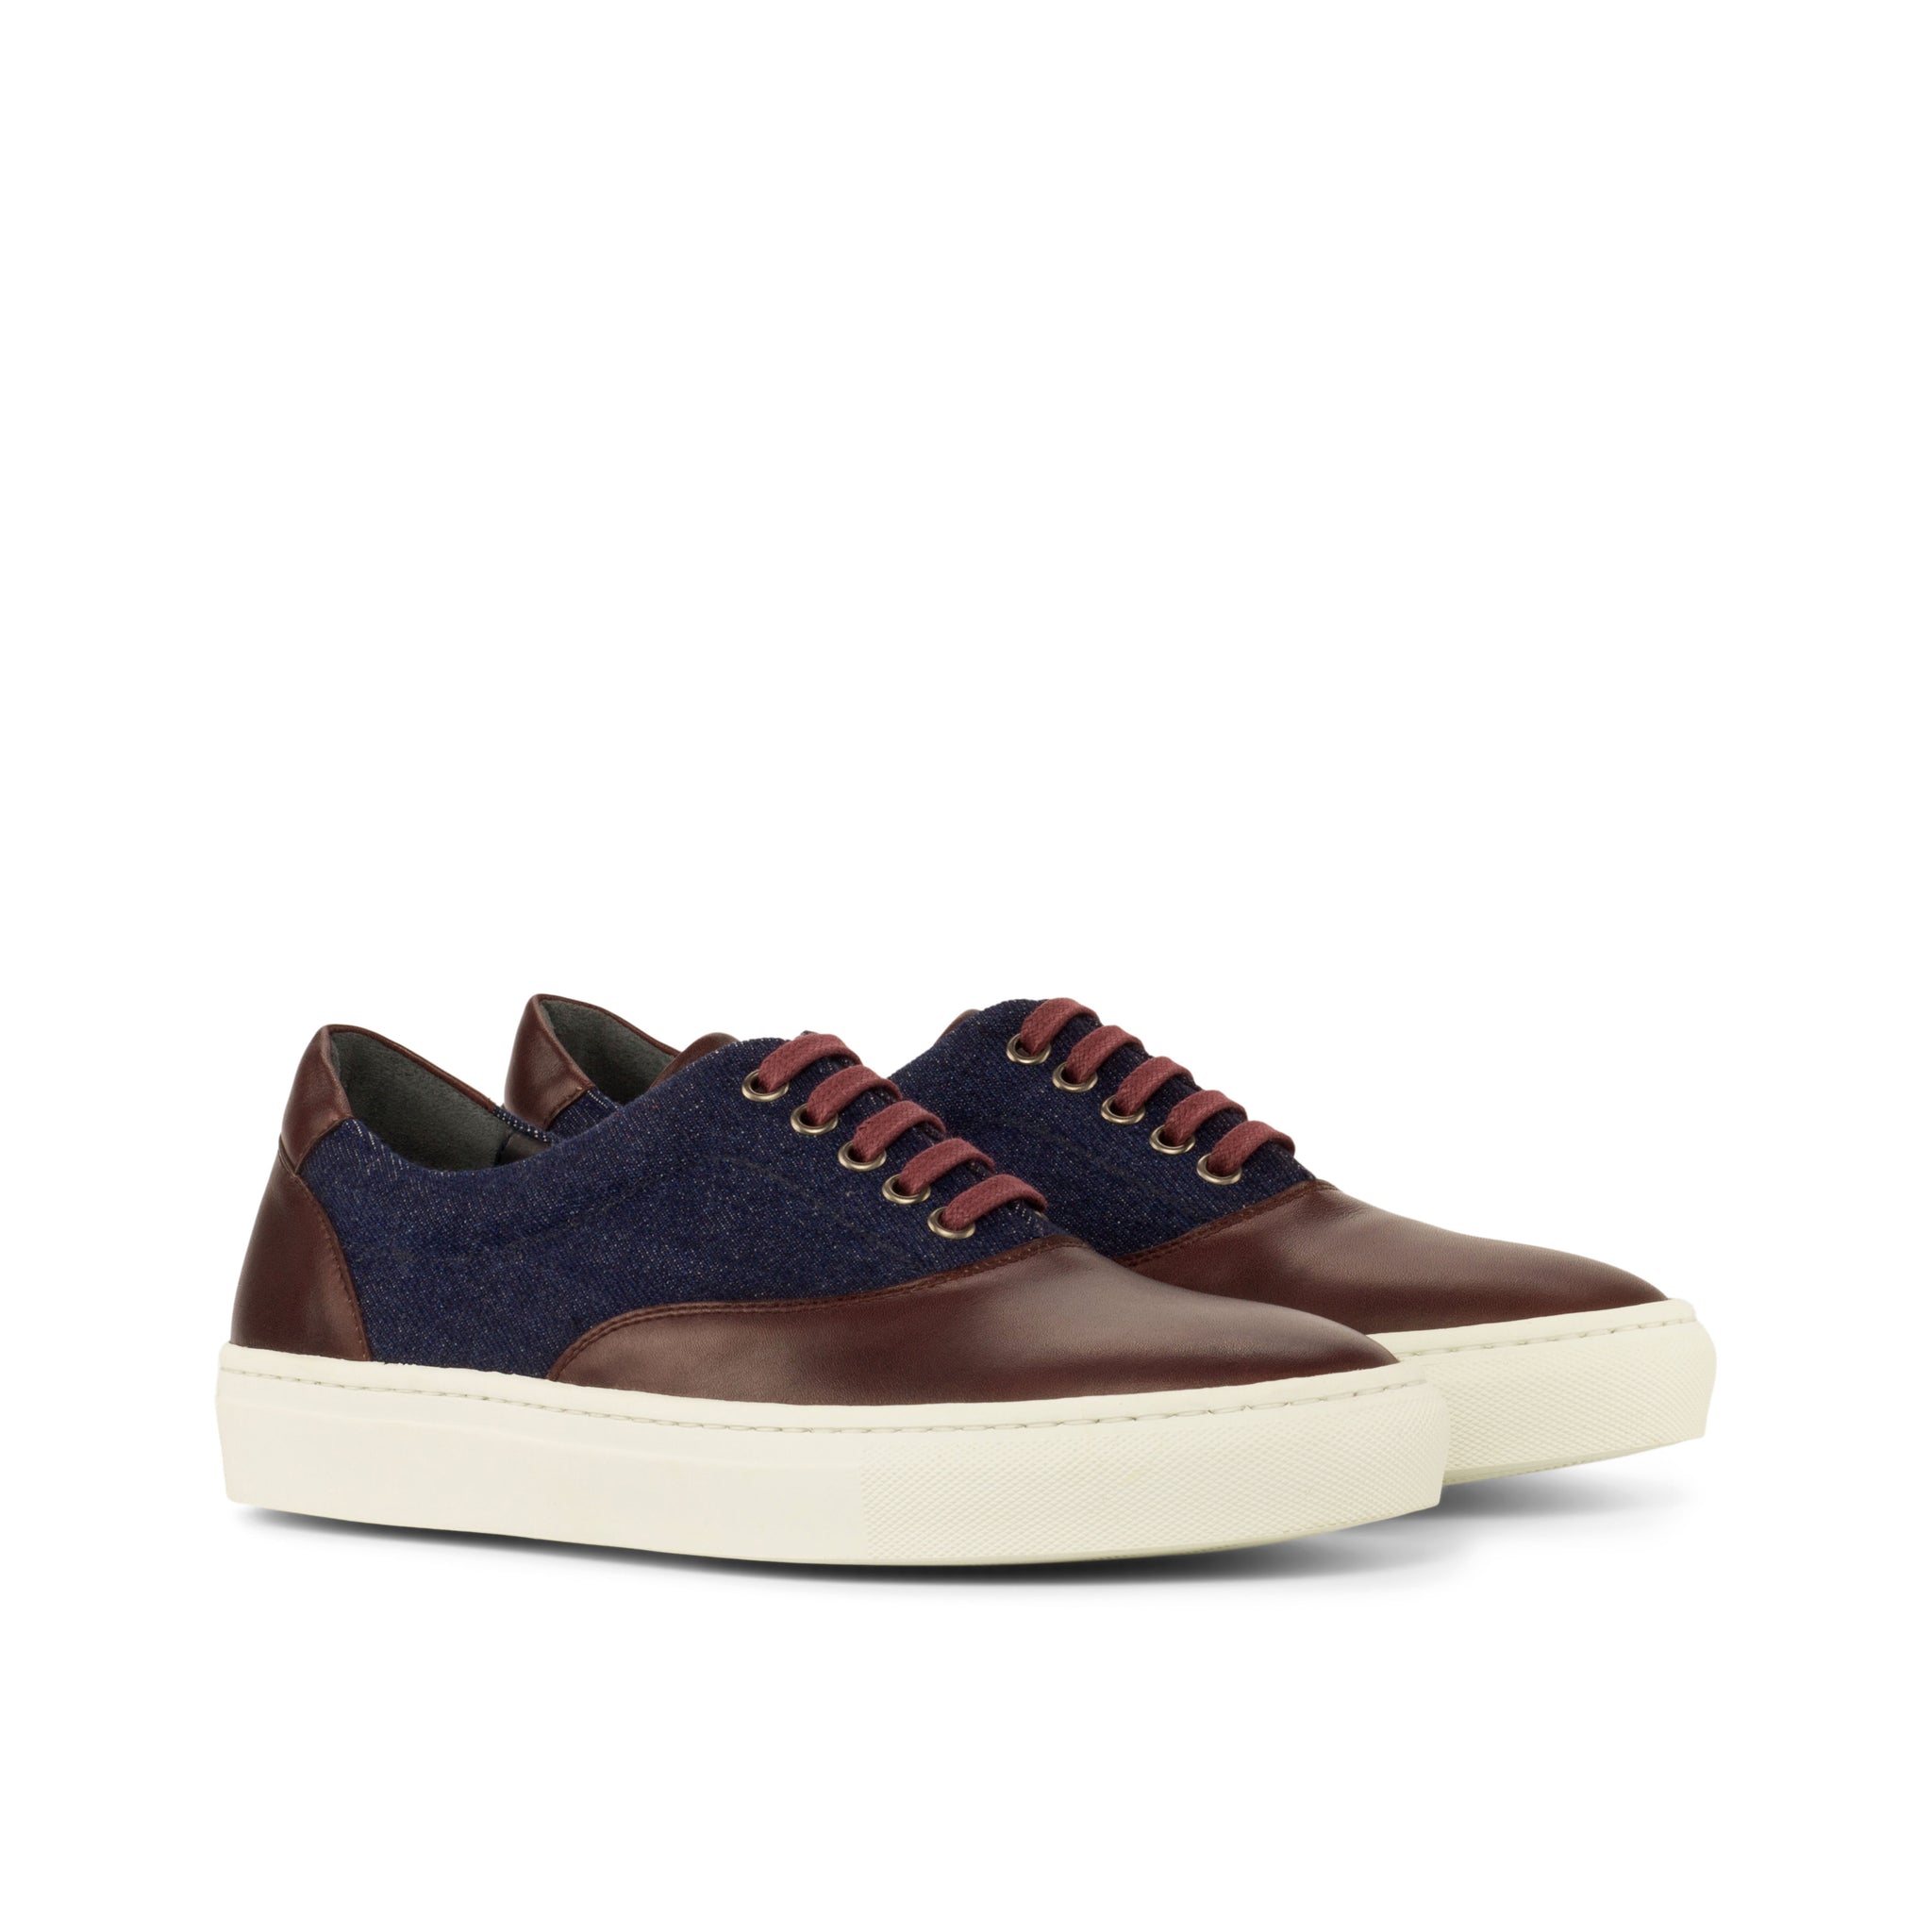 Unique Handcrafted Top Sider Sneaker - Painted Calf Burgundy-Jeans Navy